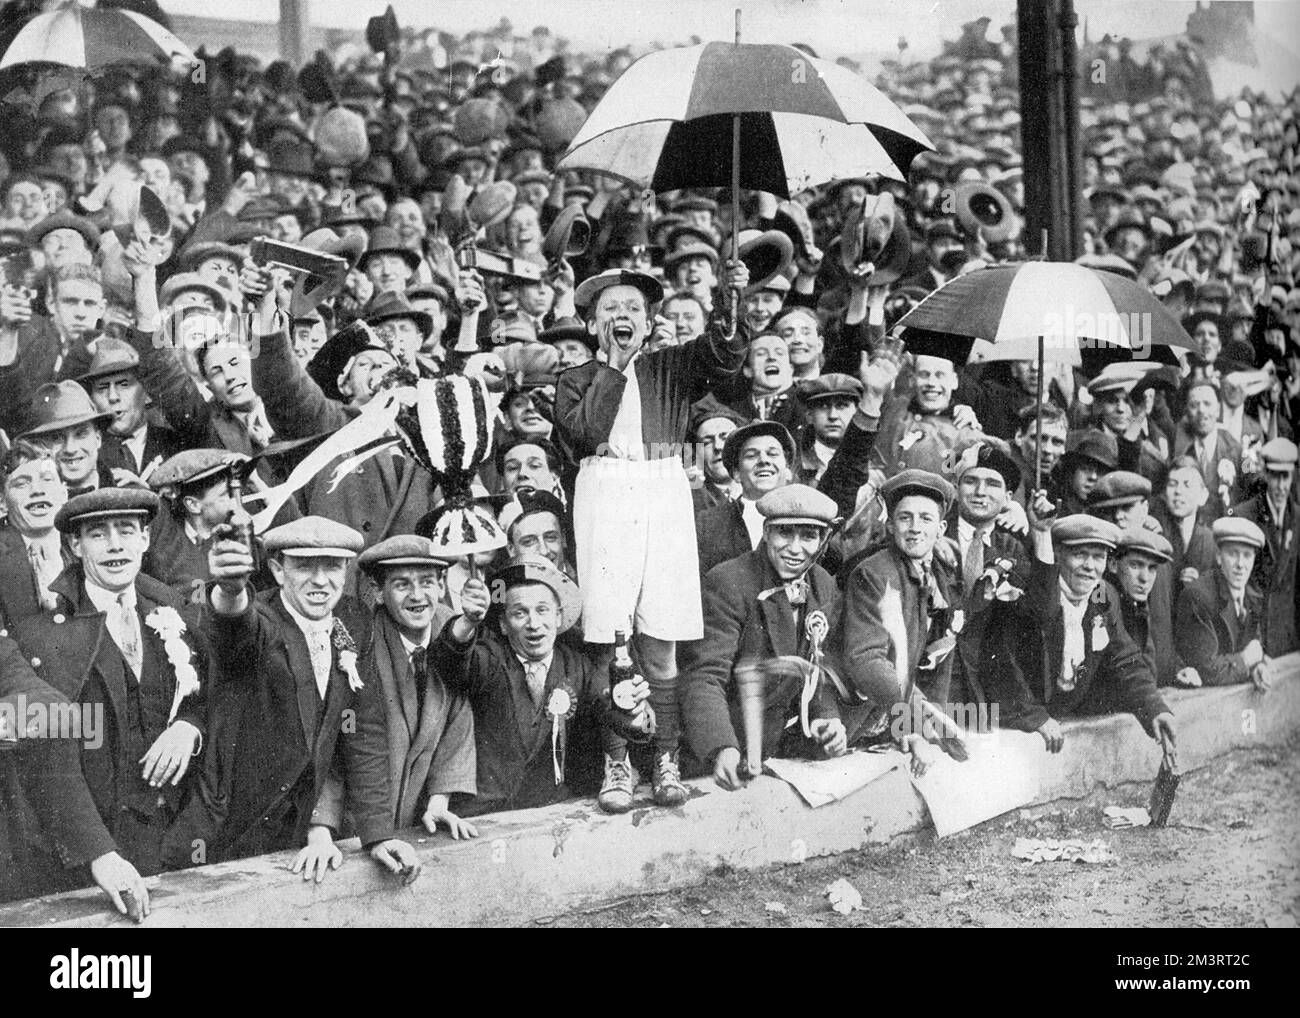 A jolly crowd of football fans at the Leicester ground for the semi-final of the Football Association cup between Blackburn Rovers and Arsenal in March 1928.  According to The Graphic, &quot;The uproar when Arsenal were beaten by 1-0 could have been heard over half the shire, and was echoed in the crowded trains which bore the disappointed supporters of the London team home.&quot;  It being 1928, football crowds comprised almost exclusively of men, as evidenced in this photograph.    1928 Stock Photo